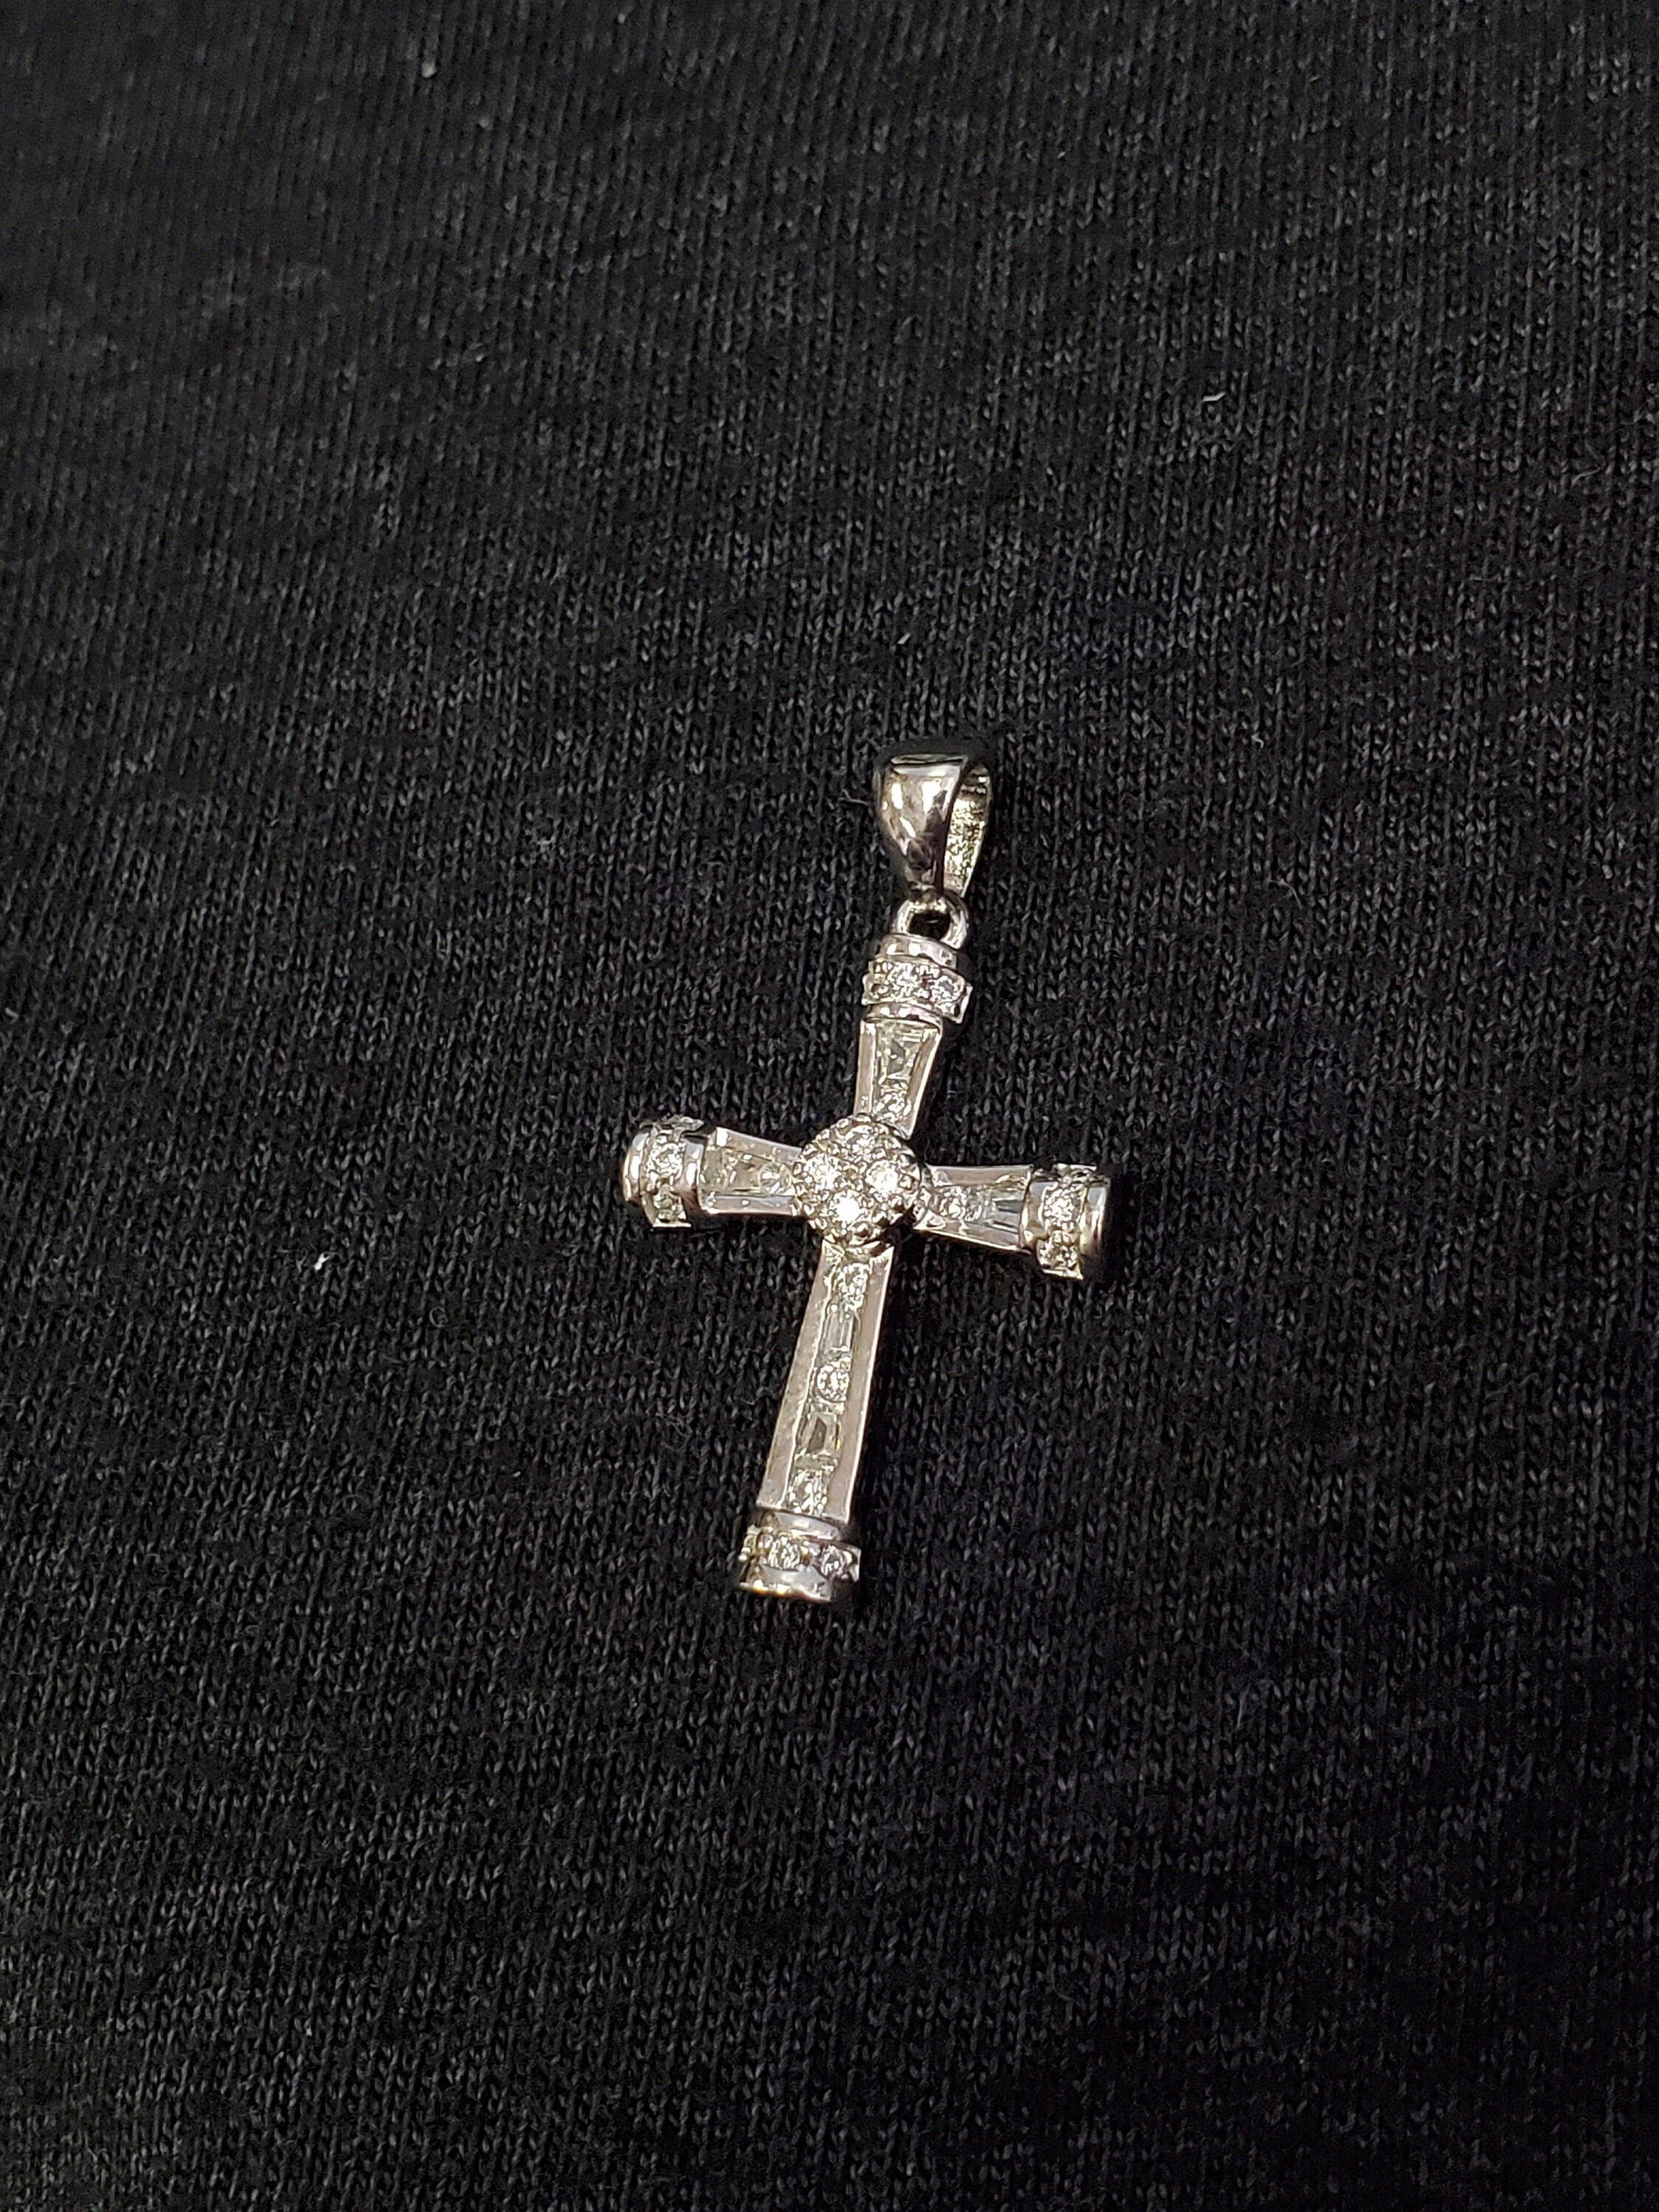 925 Sterling Silver CZ Cross Charm/Pendant Made In Italy | Etsy